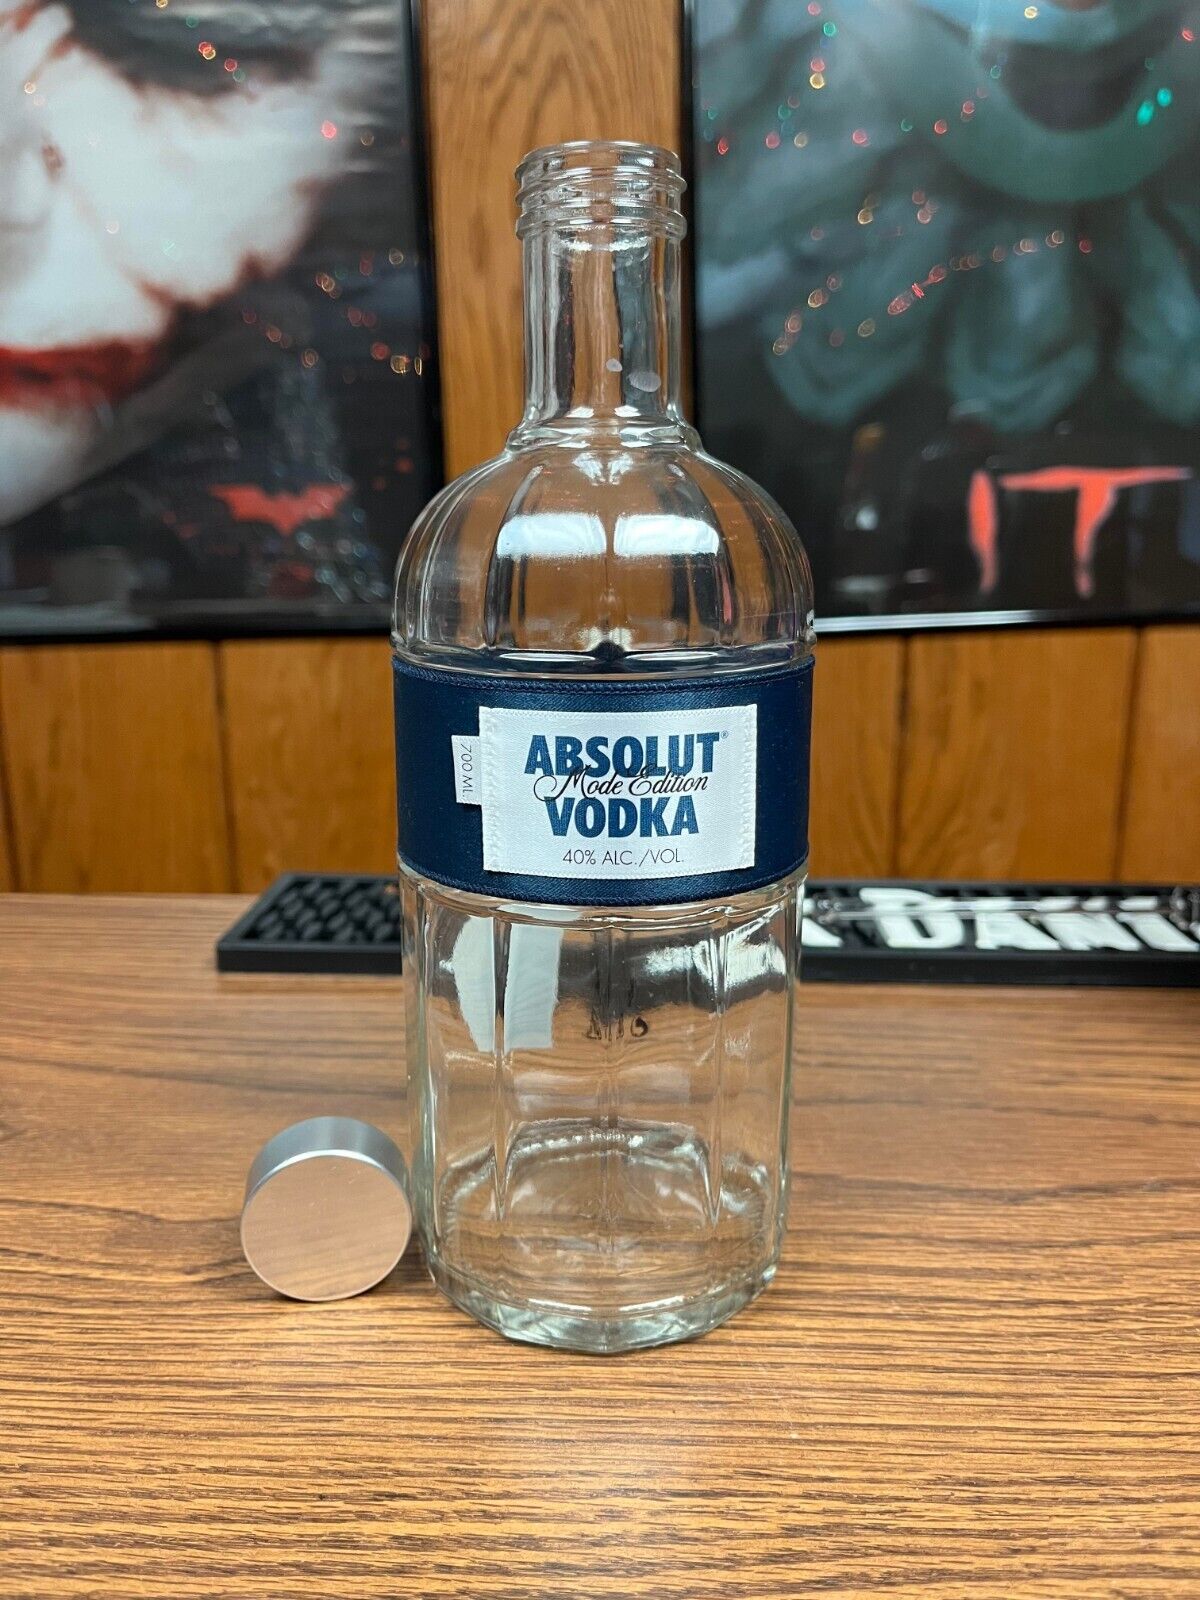 RARE ABSOLUT VODKA EMPTY 700ML MODE EDITON FROM EUROPE -GREAT DISPLAY BOTTLE